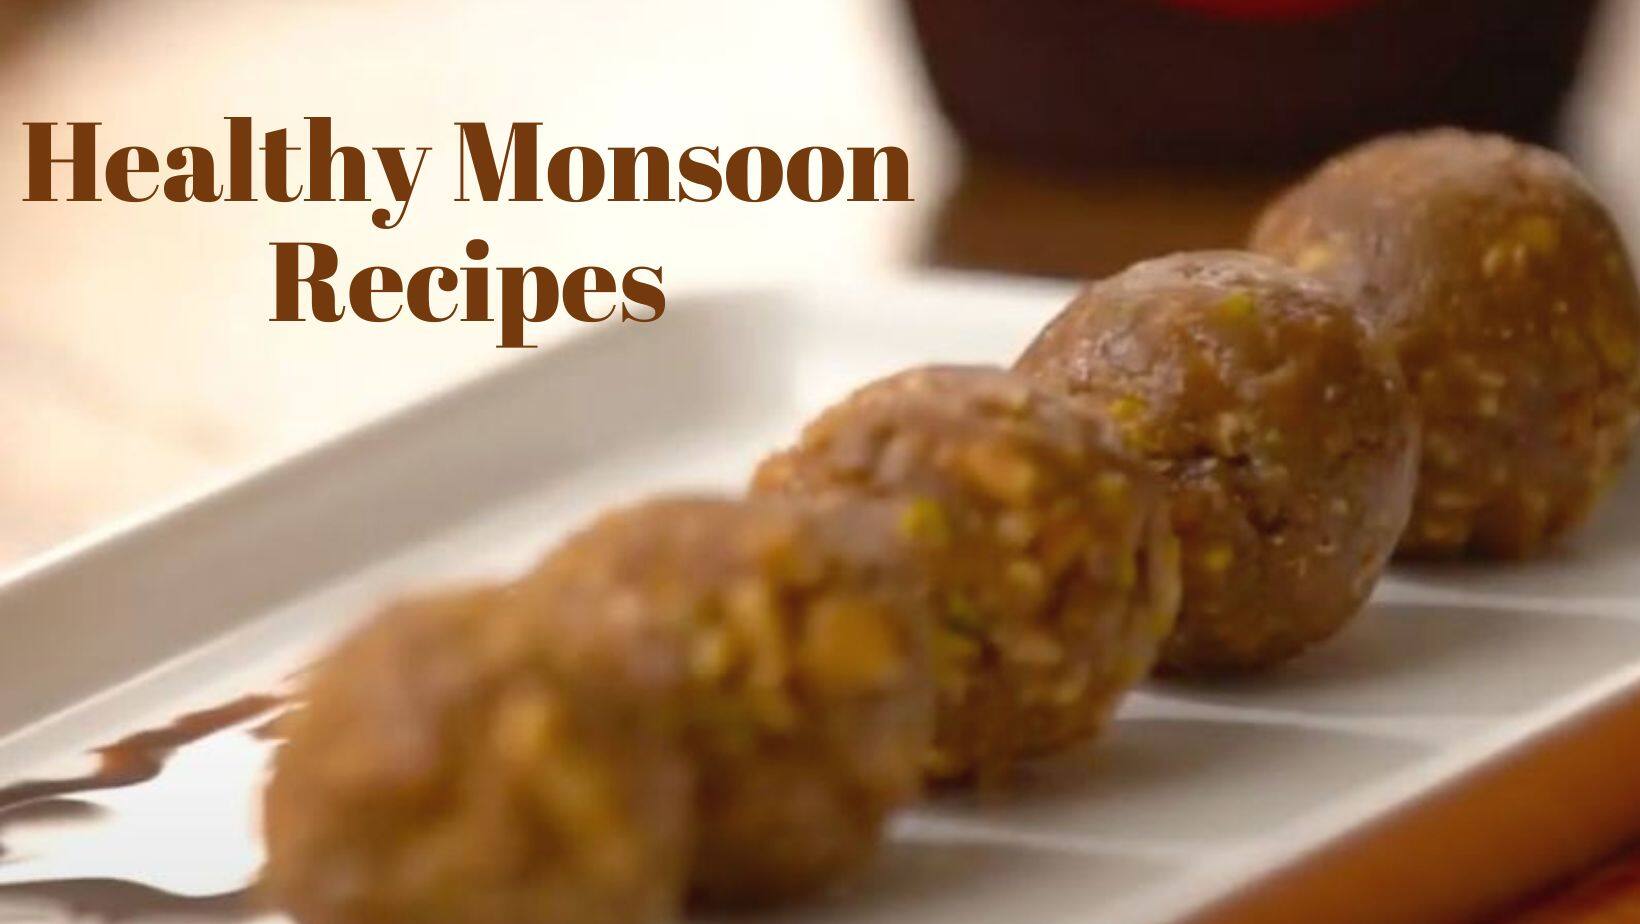 3 Healthy Monsoon Recipes That Can Help Strengthen Your Immune System